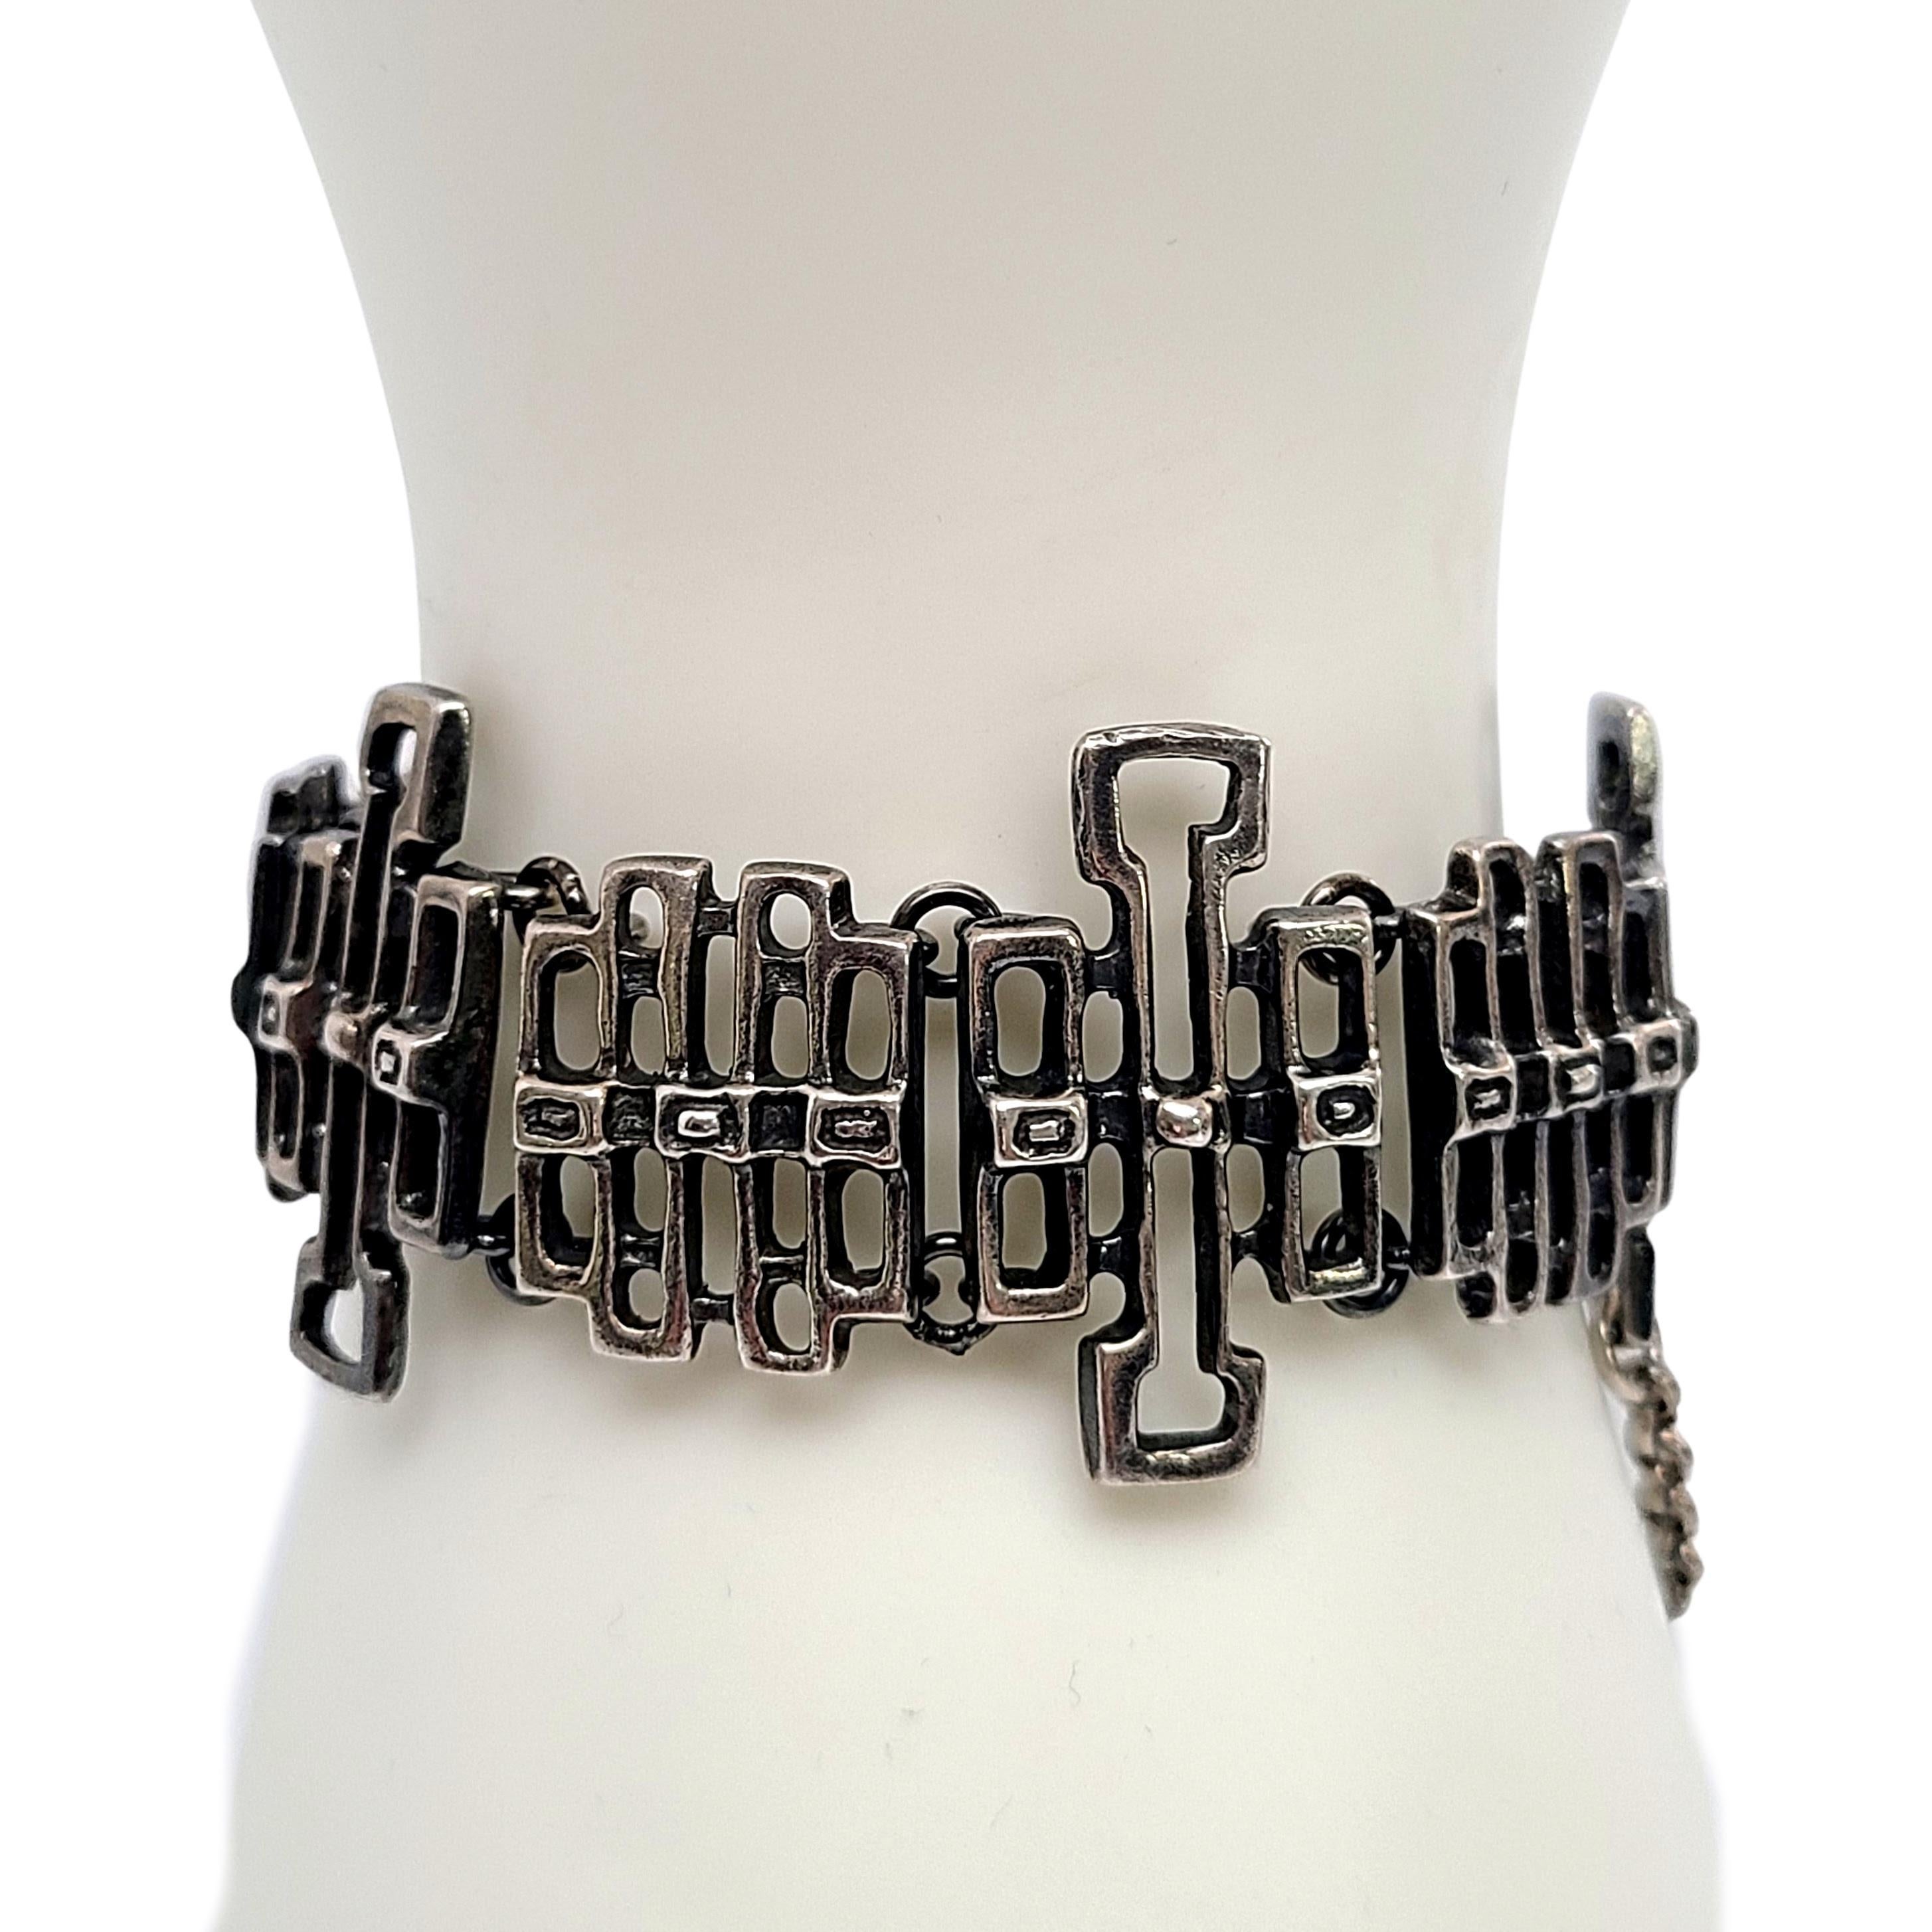 Vintage modernist link sterling silver bracelet by Unn Tangerud for David Andersen Norway, circa 1960s.

This unique piece features a cur-out modernist design links, a hidden slide clasp closure with safety chain.

Measures 7 1/2